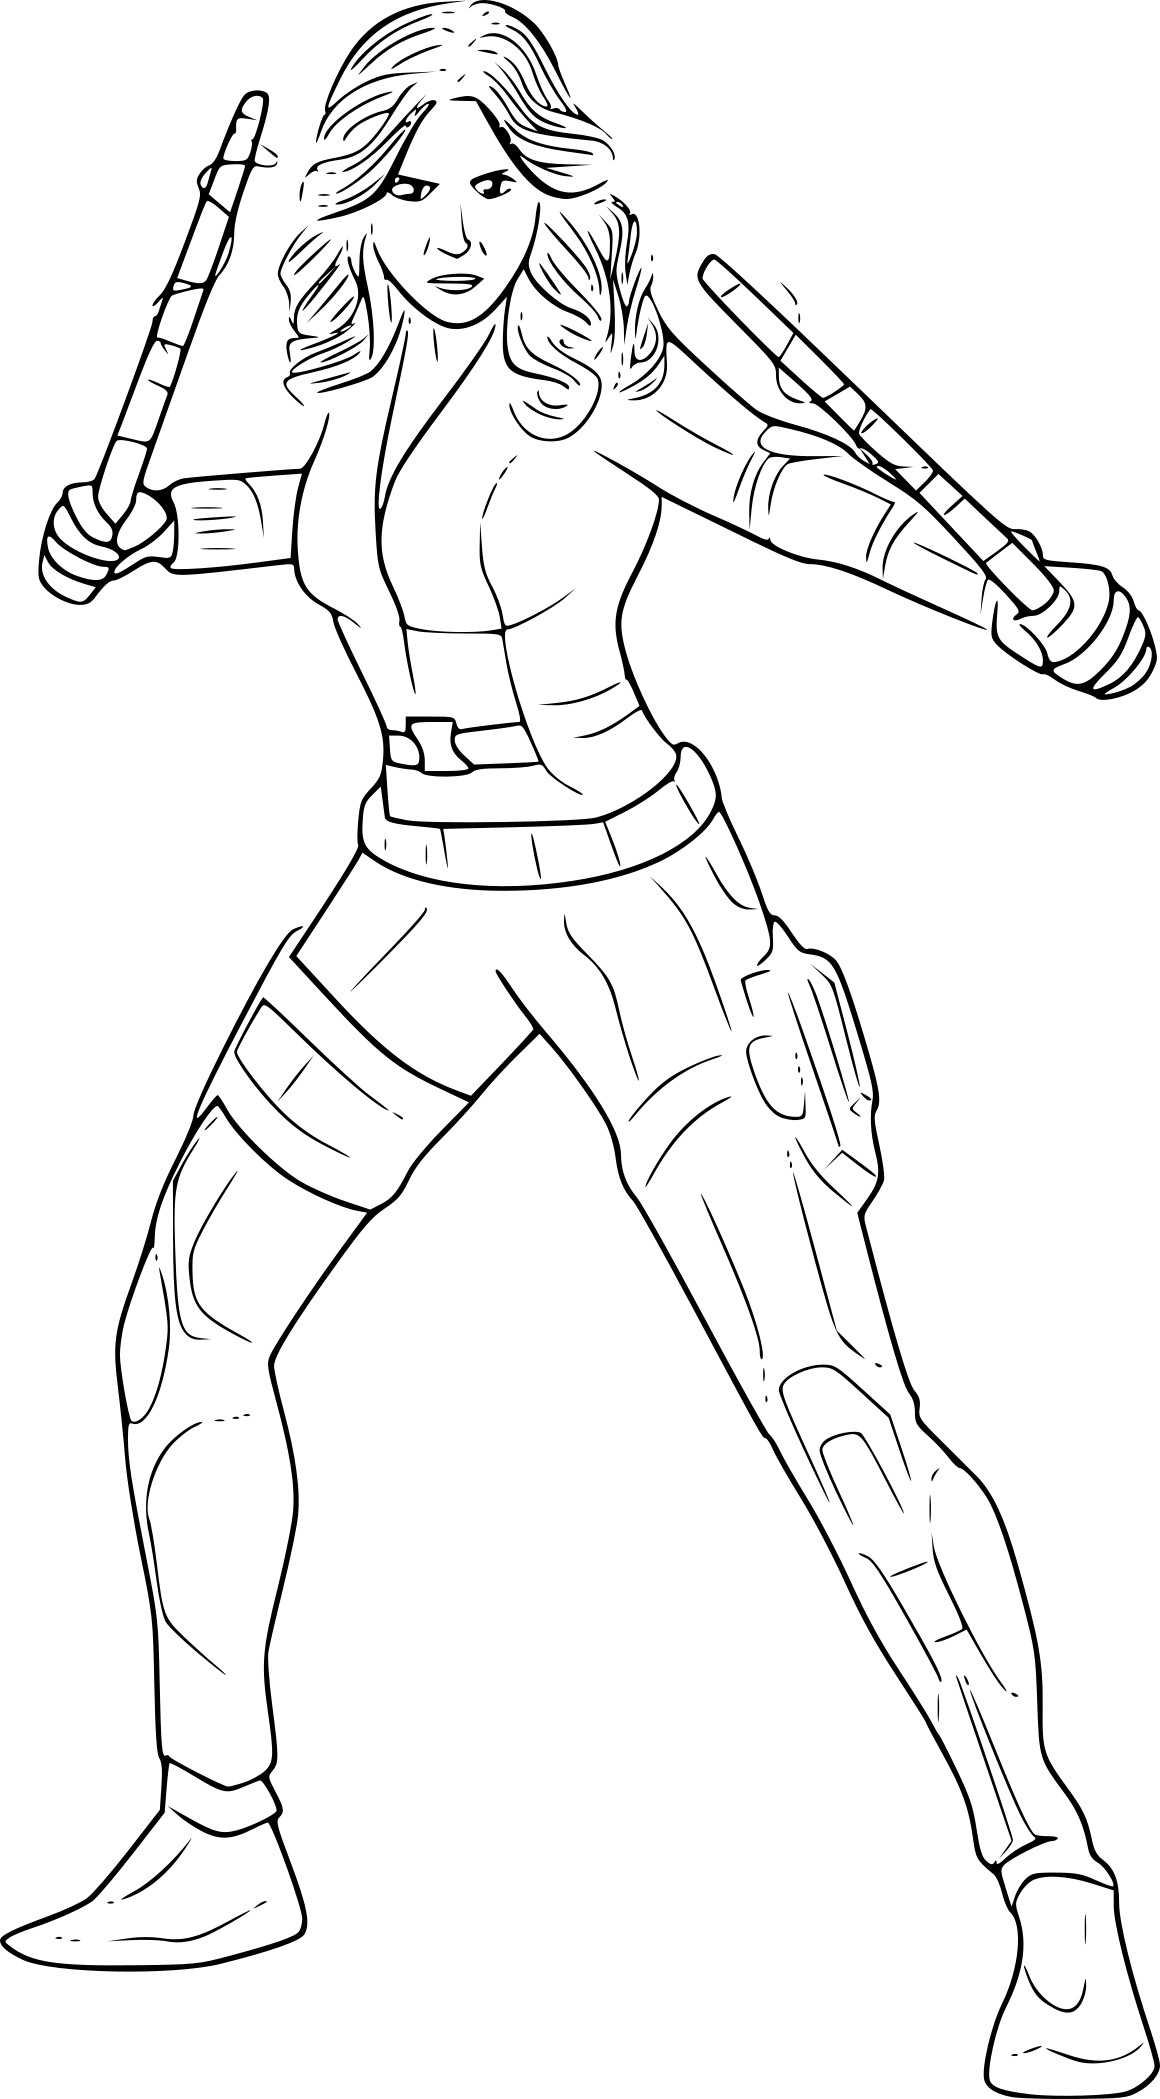 Black Widow From Avengers coloring page